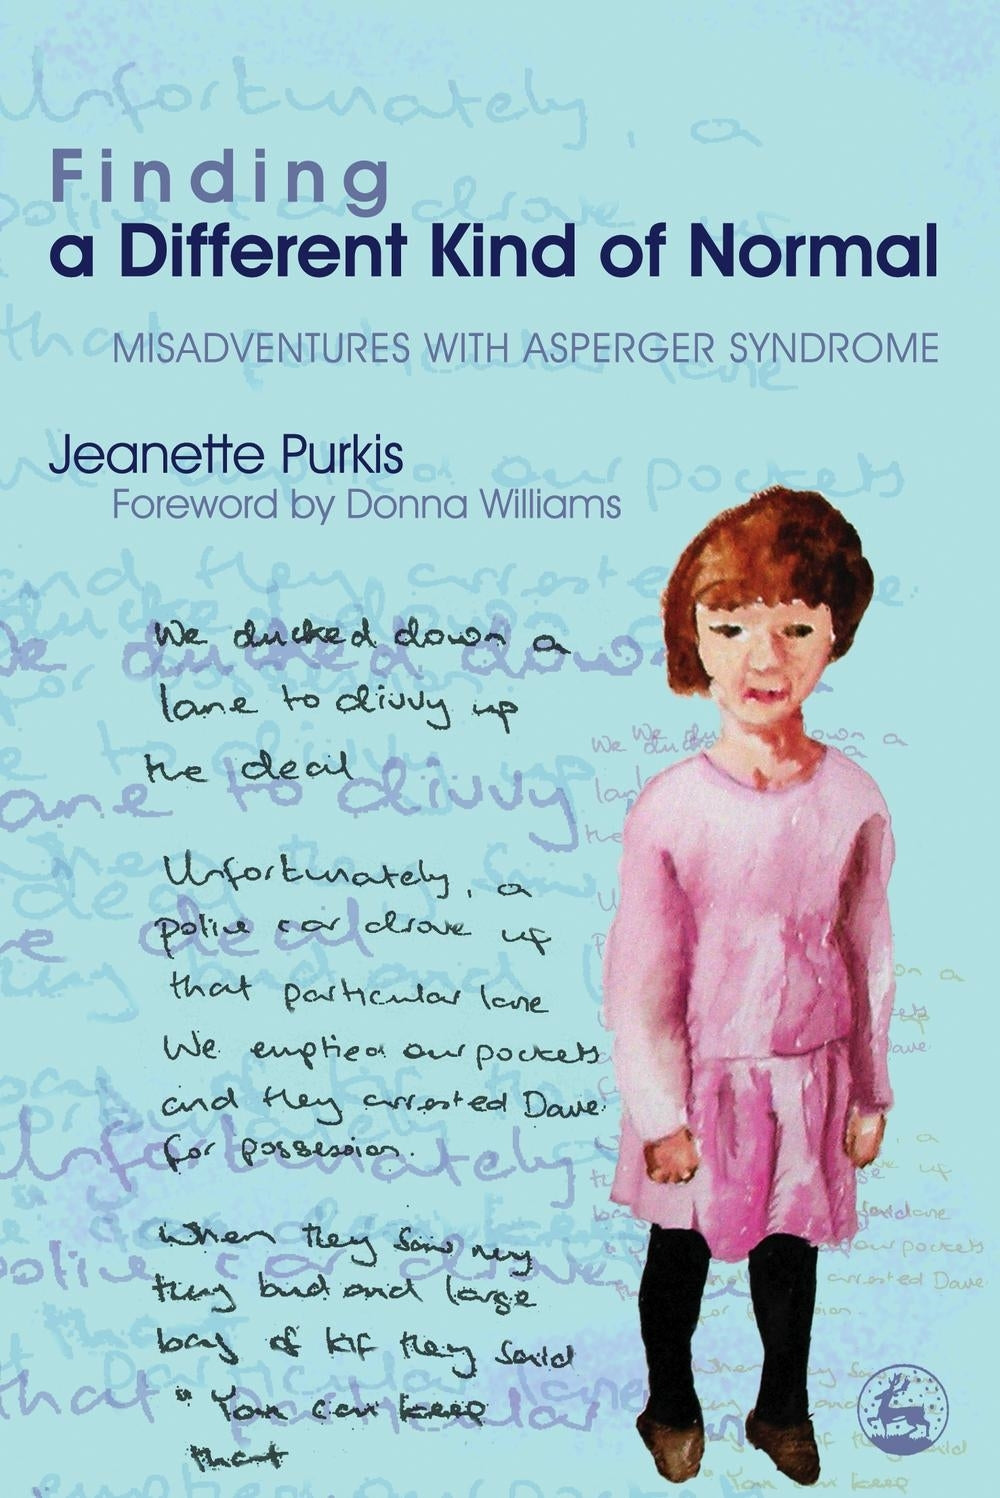 Finding a Different Kind of Normal by Donna Williams, Yenn Purkis